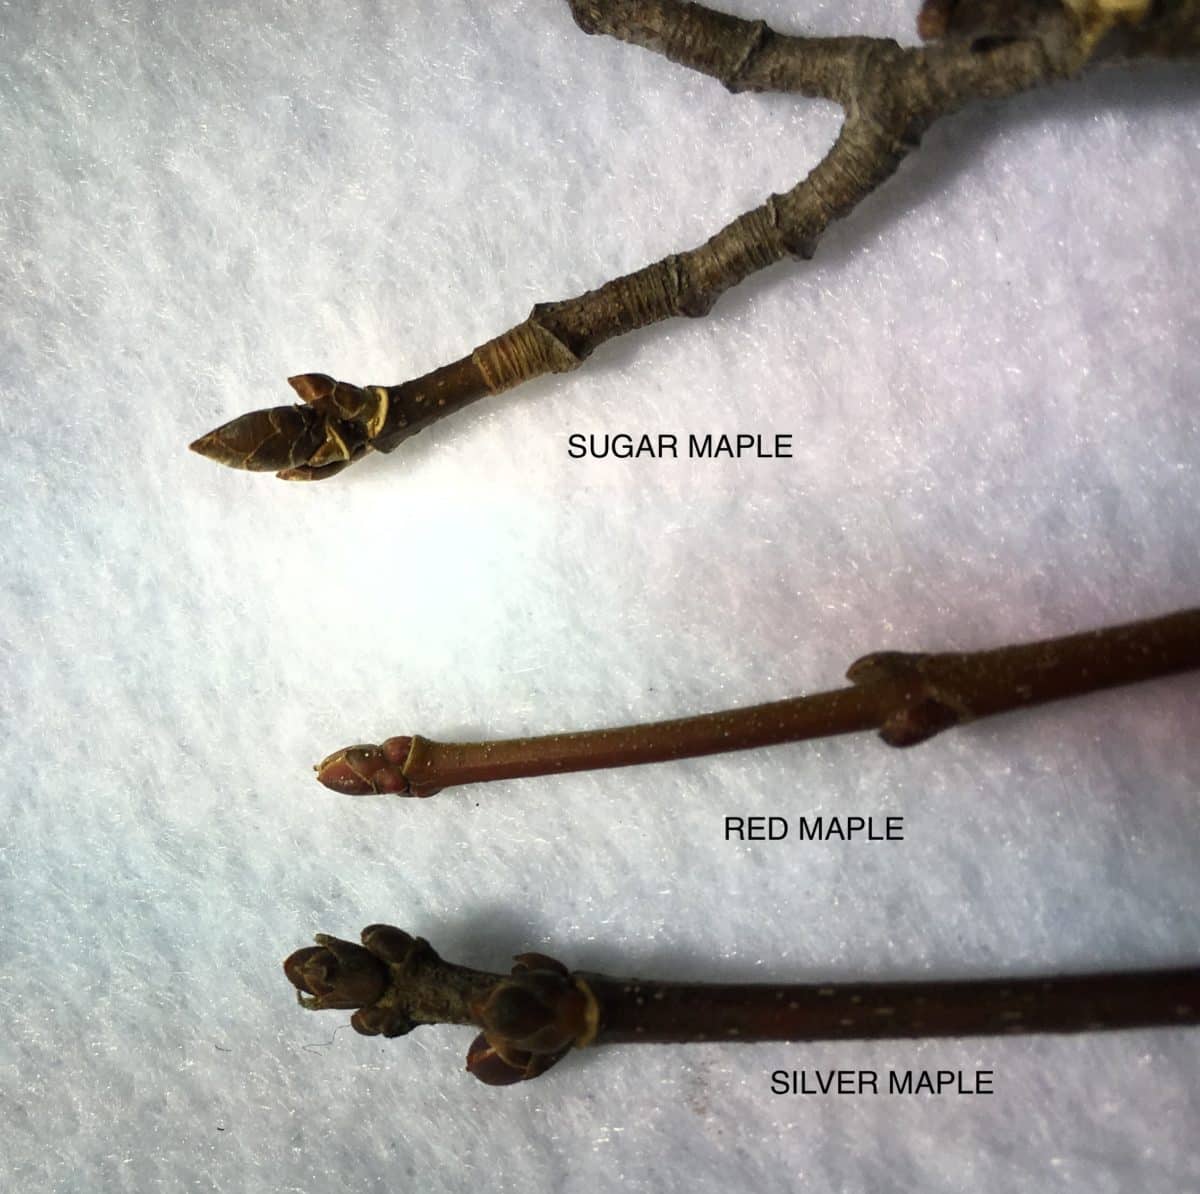 Display of buds of the sugar maple, red maple and silver maple